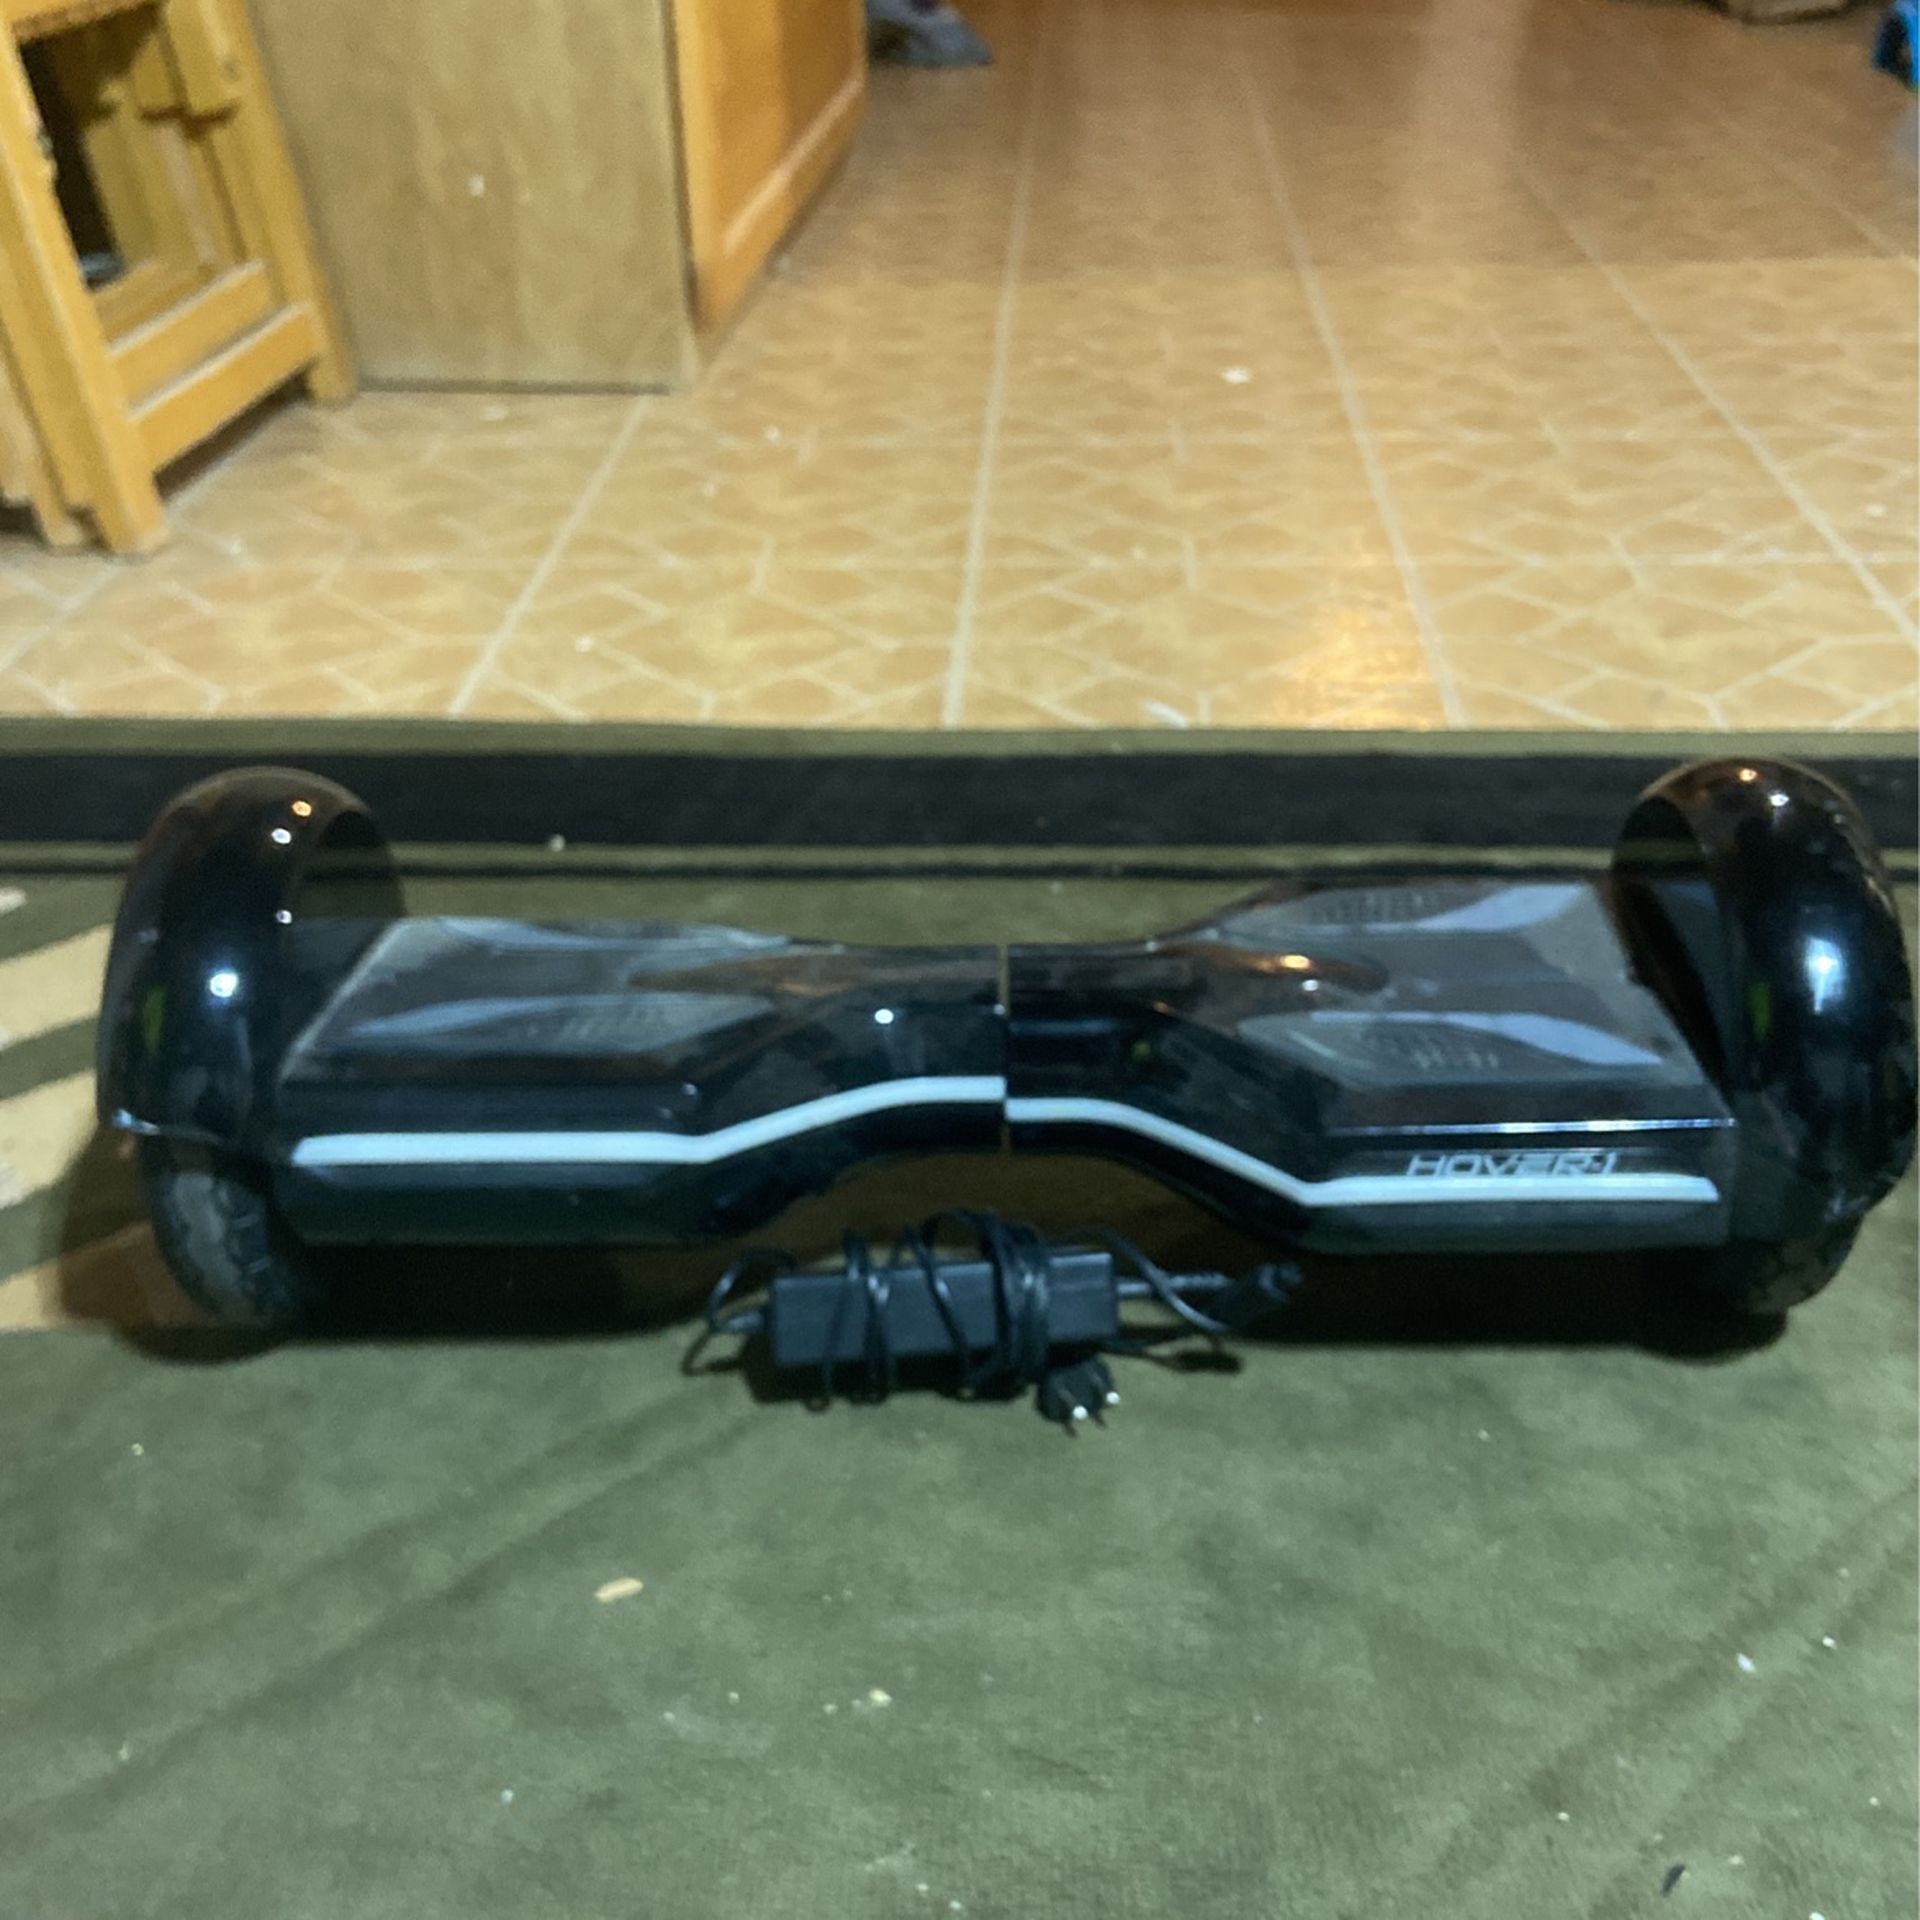 Led Bluetooth Hoverboard With Charger(Used And Has Some Scratches)